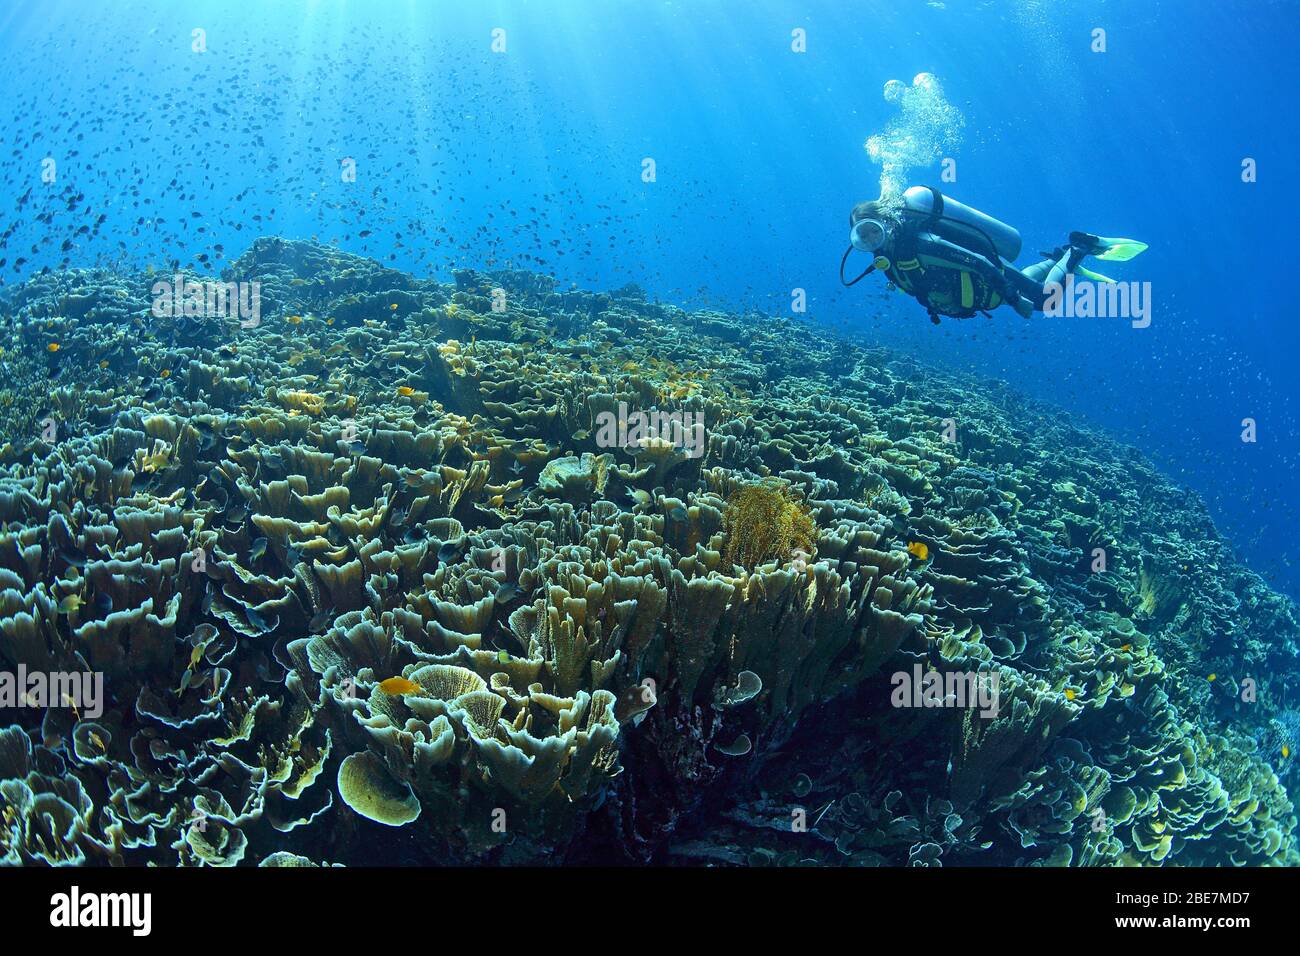 Scuba diver in a coral reef with dominating Montipora corals (Acroporidae), Mindanao, Philippines Stock Photo